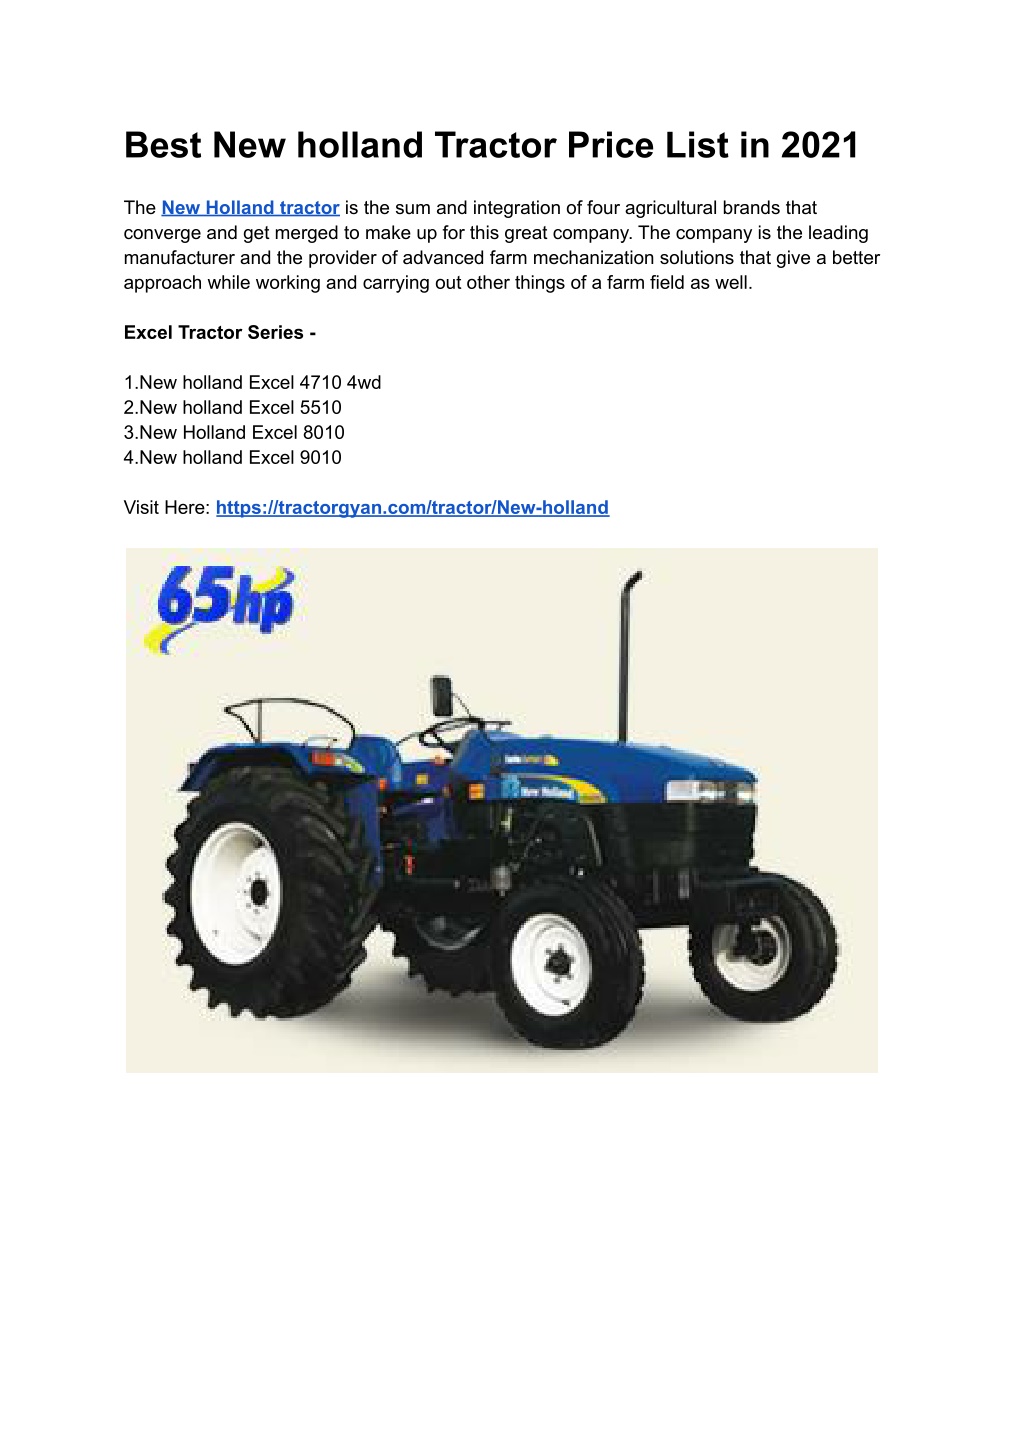 PPT Best New holland Tractor Price List in 2021 PowerPoint